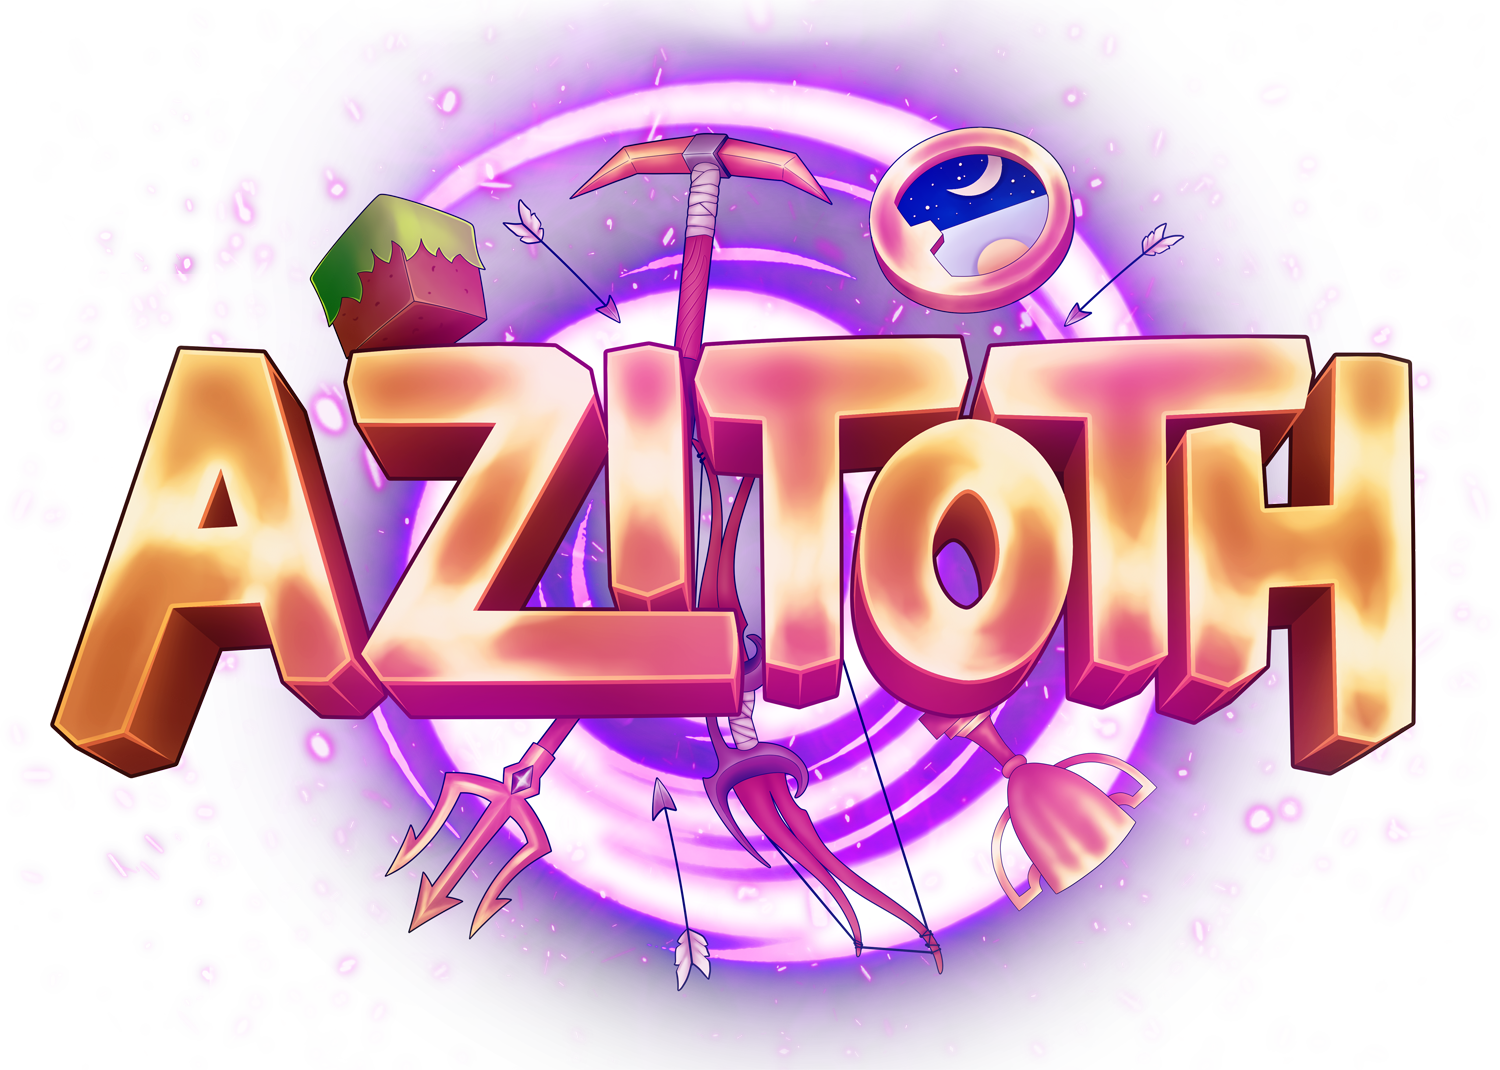 Azitoth golden text with a purple vortex behind it and various Minecraft items being sucked in